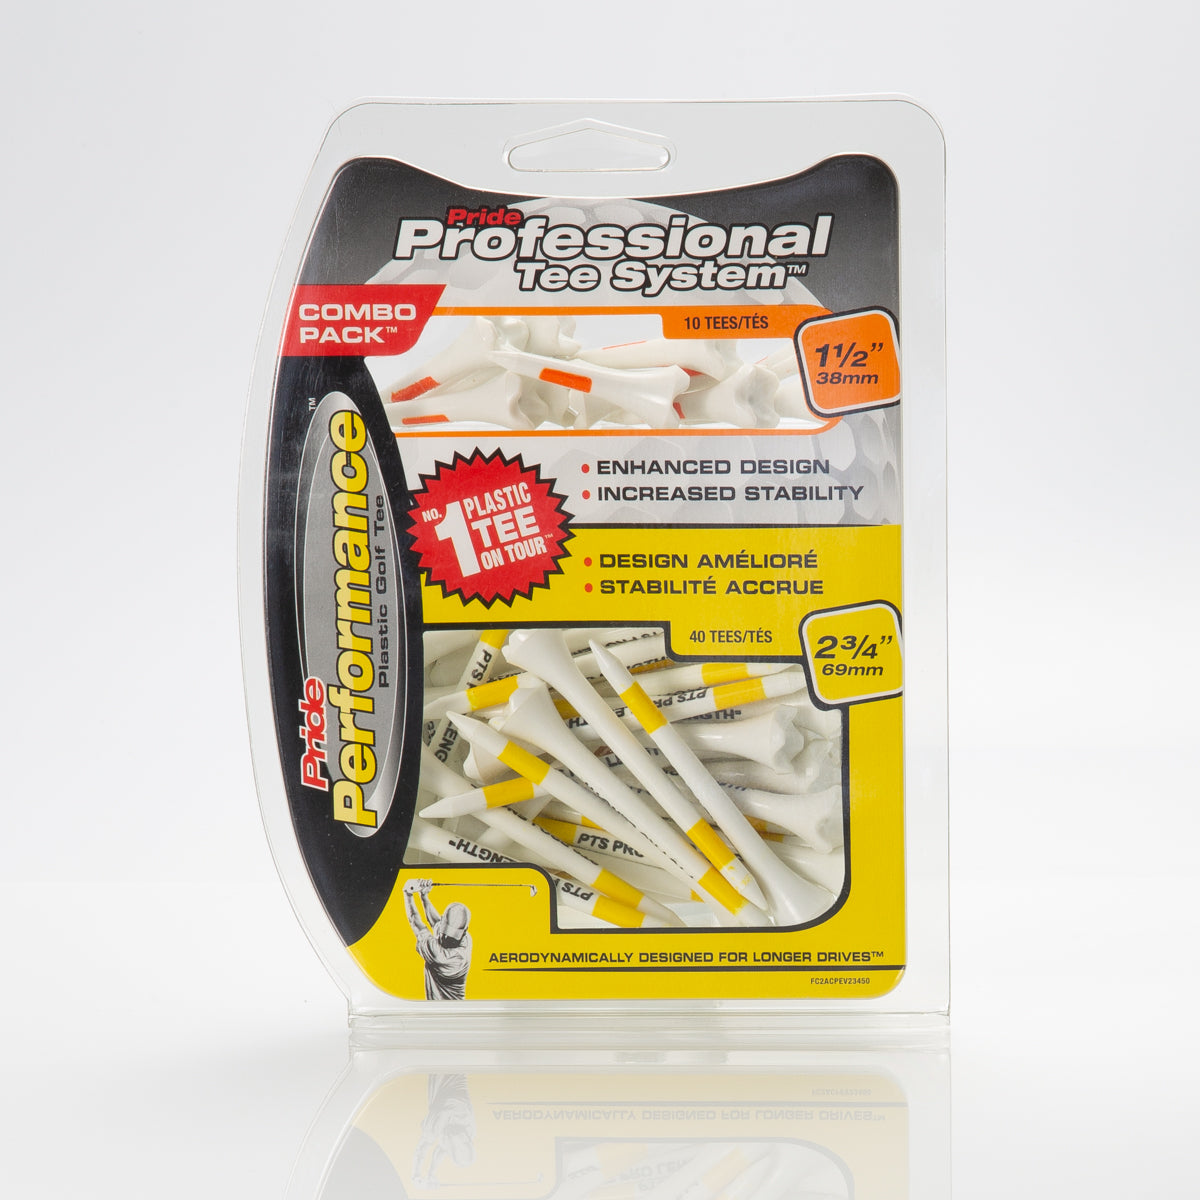 Professional Tee System® (PTS) Pride Performance® Combo Packs - Includes 2 3/4" & 1 1/2" Tees!